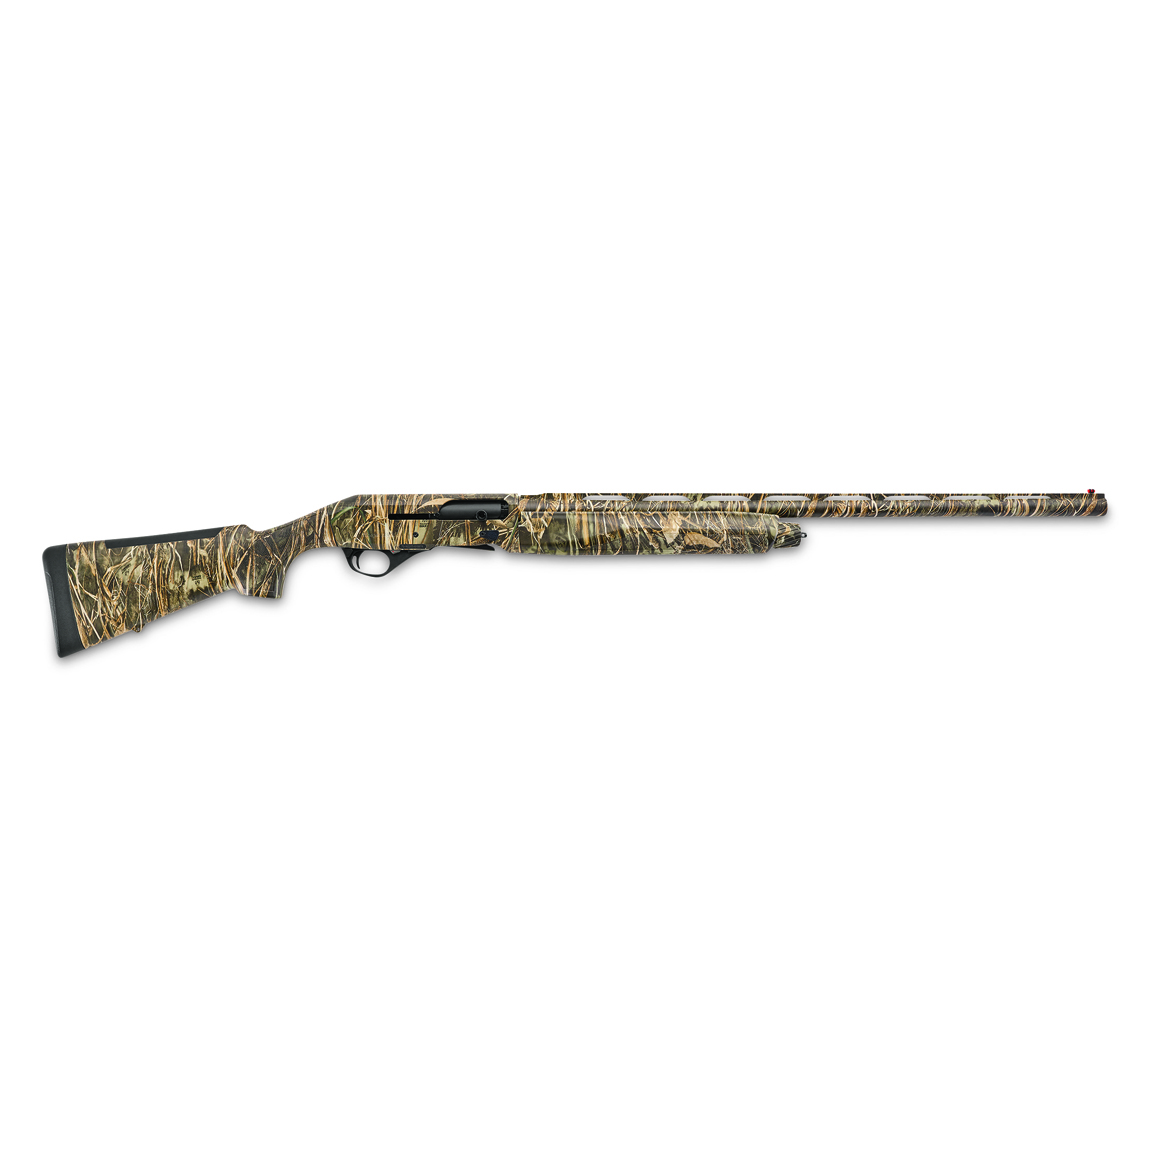 Stoeger M3000, Semi-automatic, 12 Gauge, 28" Barrel, Realtree Max-7, 4+1 Rounds